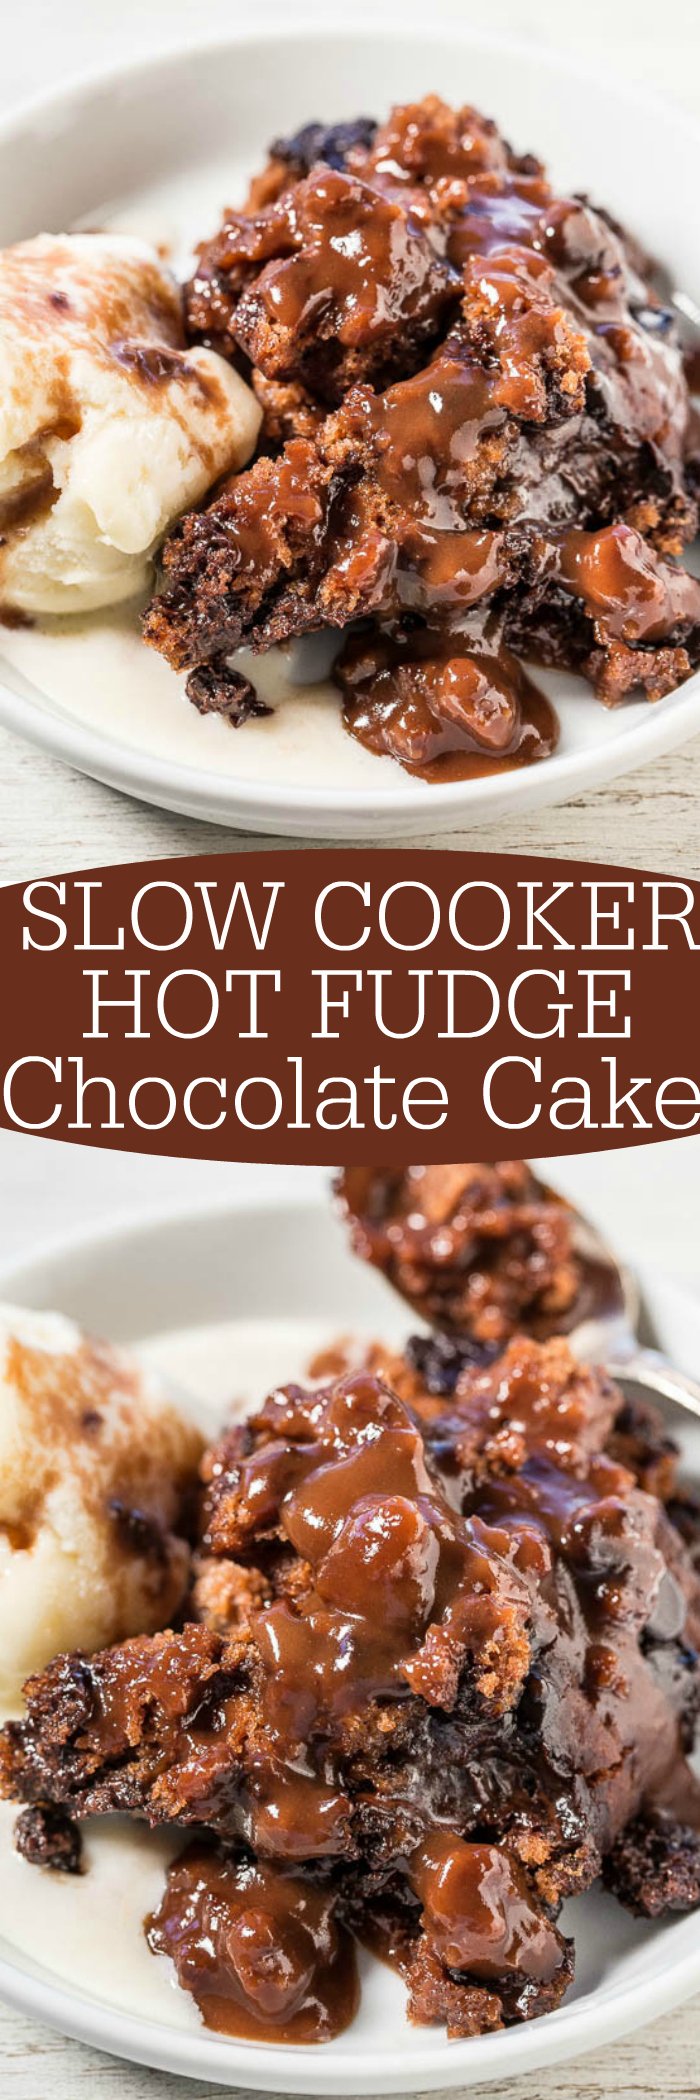 Slow Cooker Hot Fudge Chocolate Cake - Super soft, gooey, rich, and fudgy!! The cake makes its own hot fudge sauce while cooking in the slow cooker! The easiest cake you'll ever make and it tastes amazing!!